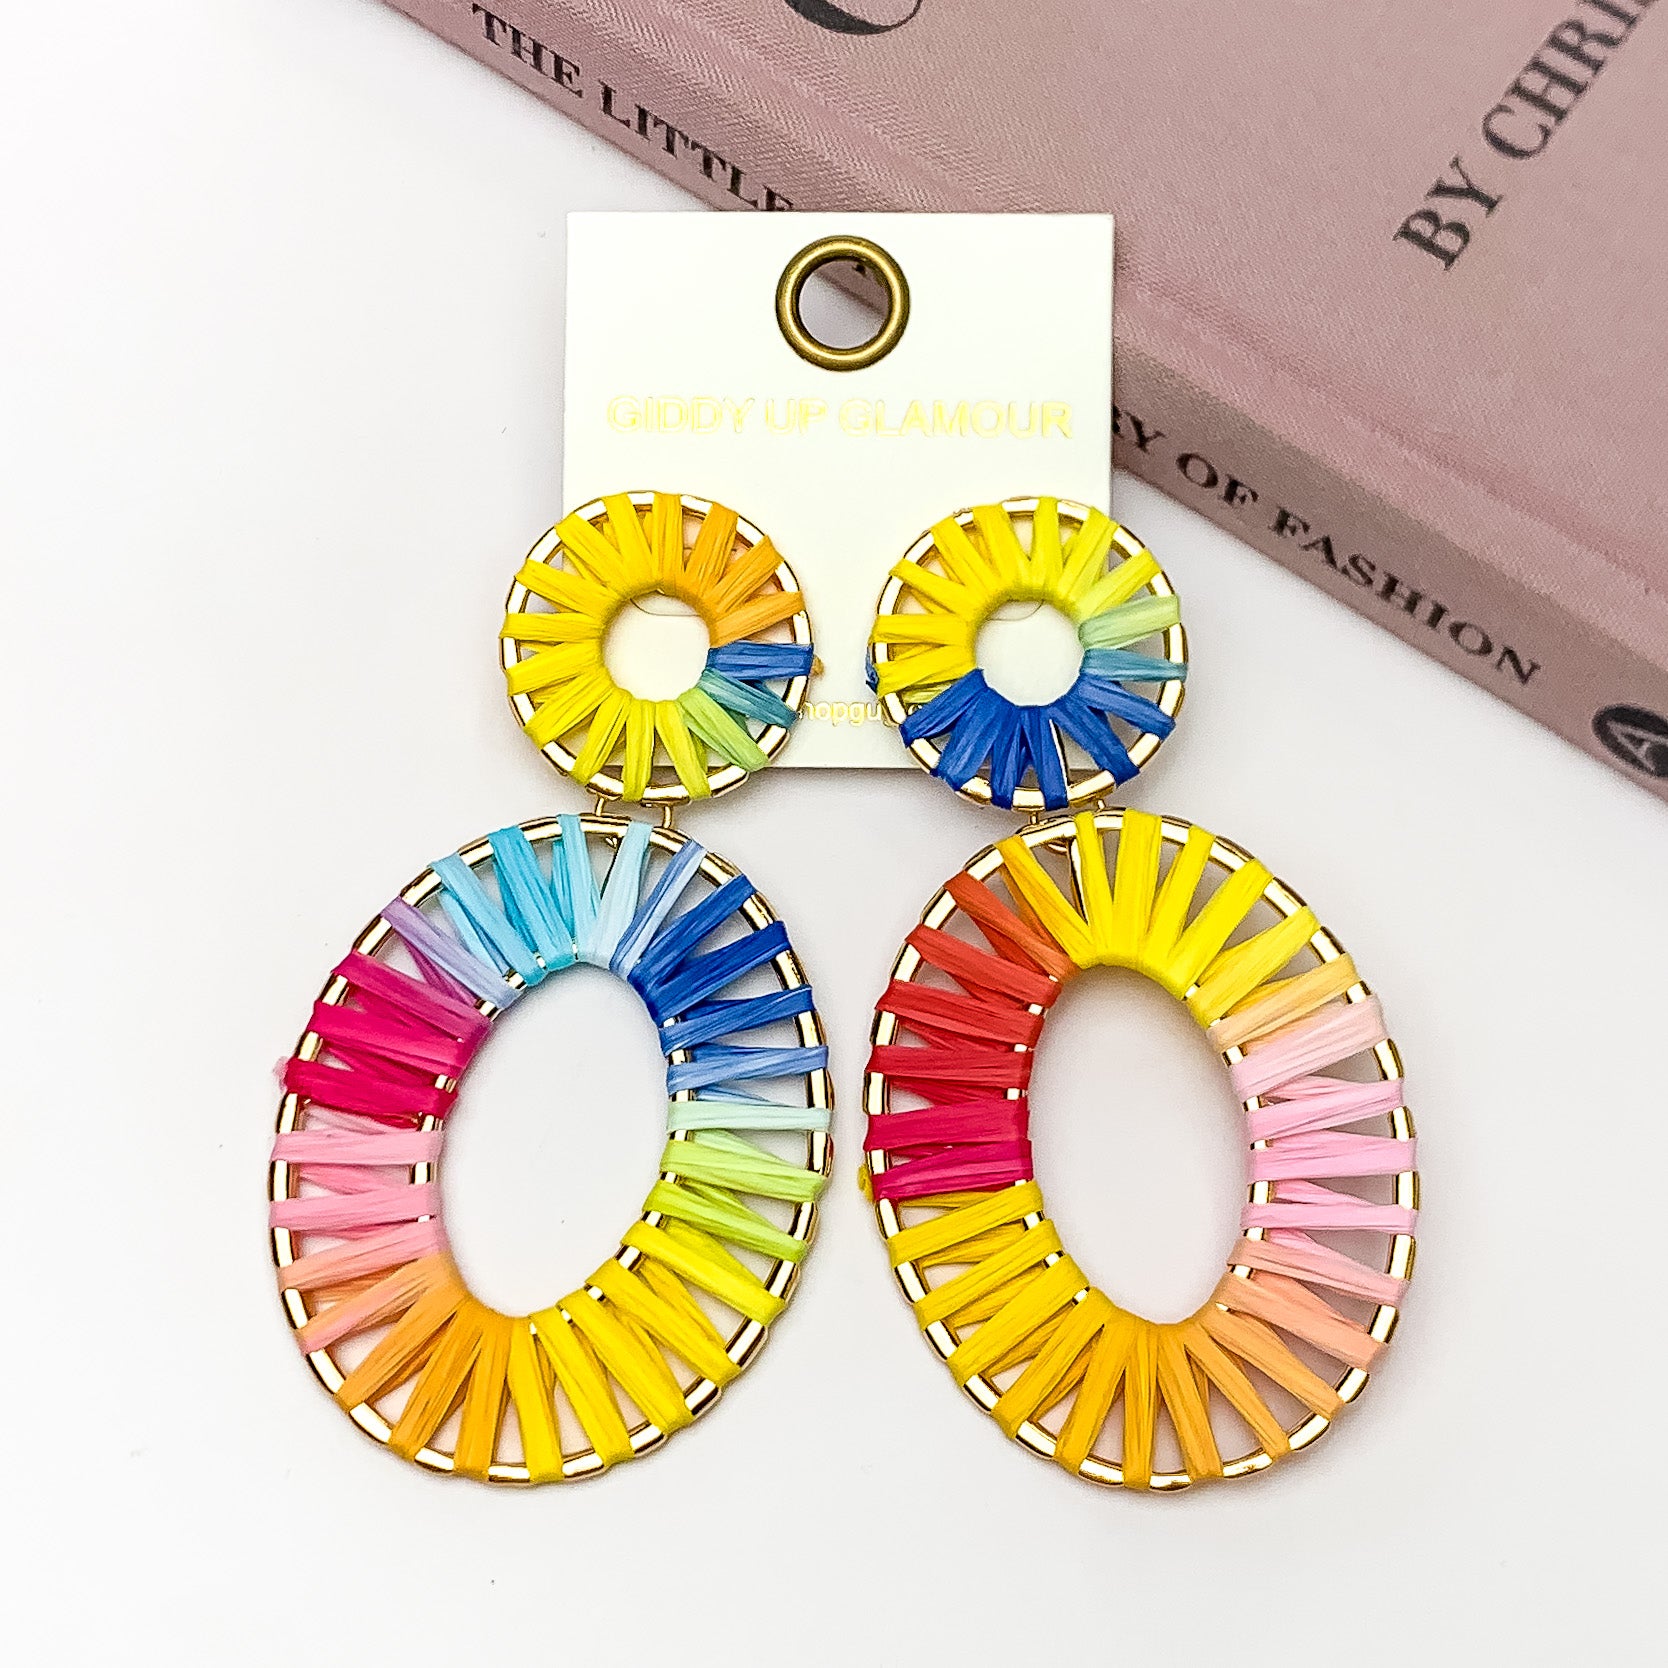 Rainbow Sunshine Open Oval Earrings in Multicolor. Pictured on a white background with the earrings laying against a pink book.